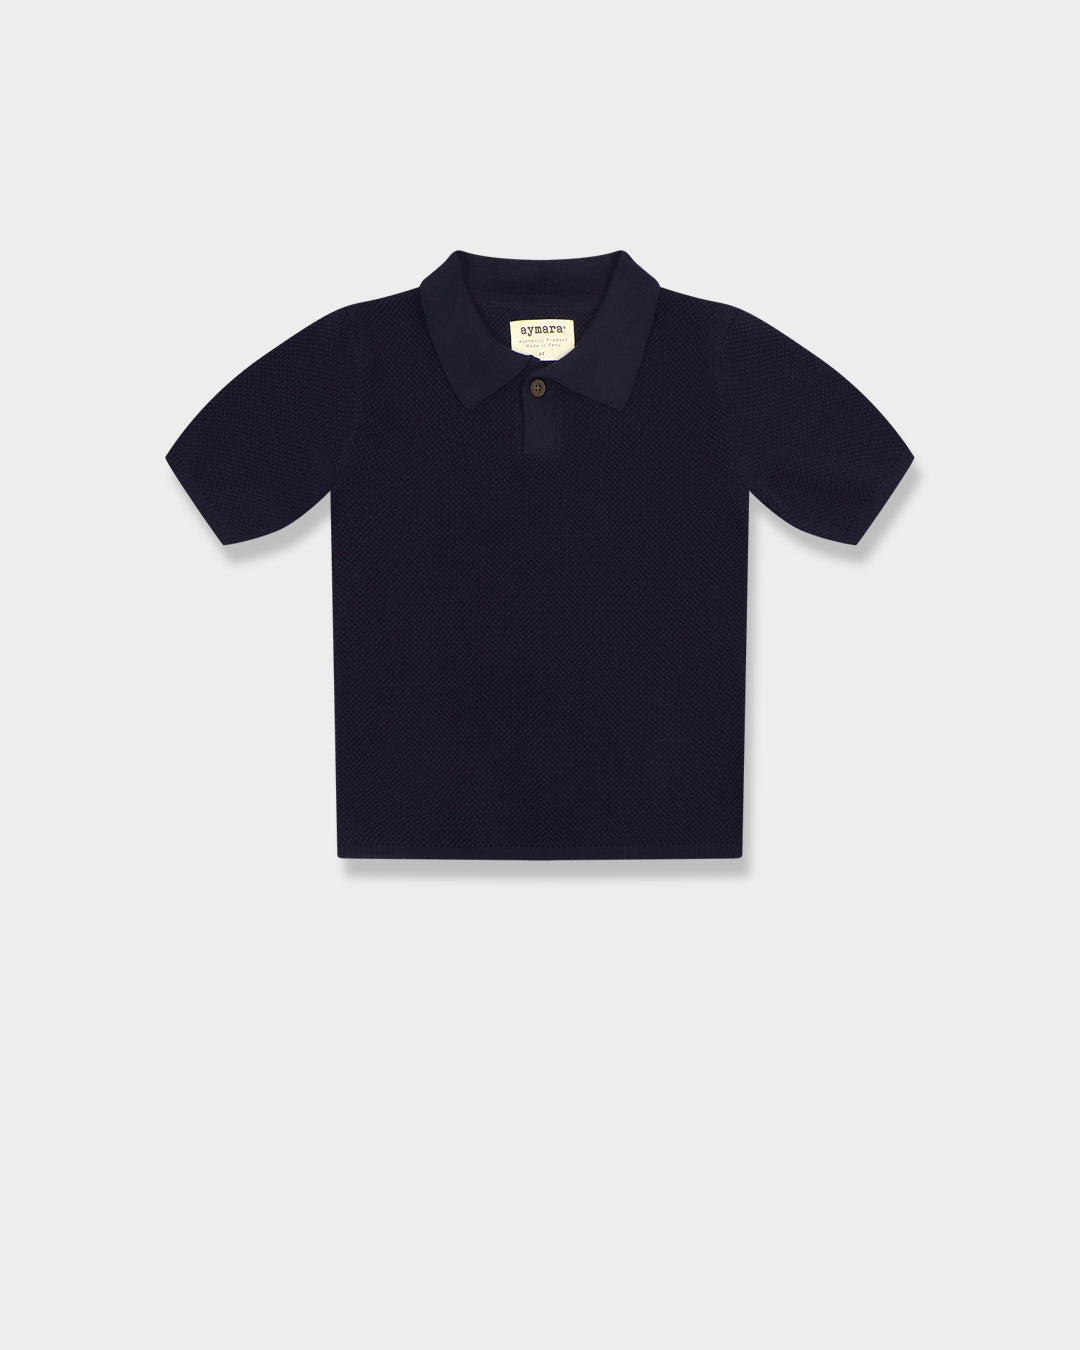 Knitted boys polo shirt Enzo navy.   Made of organic cotton. Ethically made in Peru.